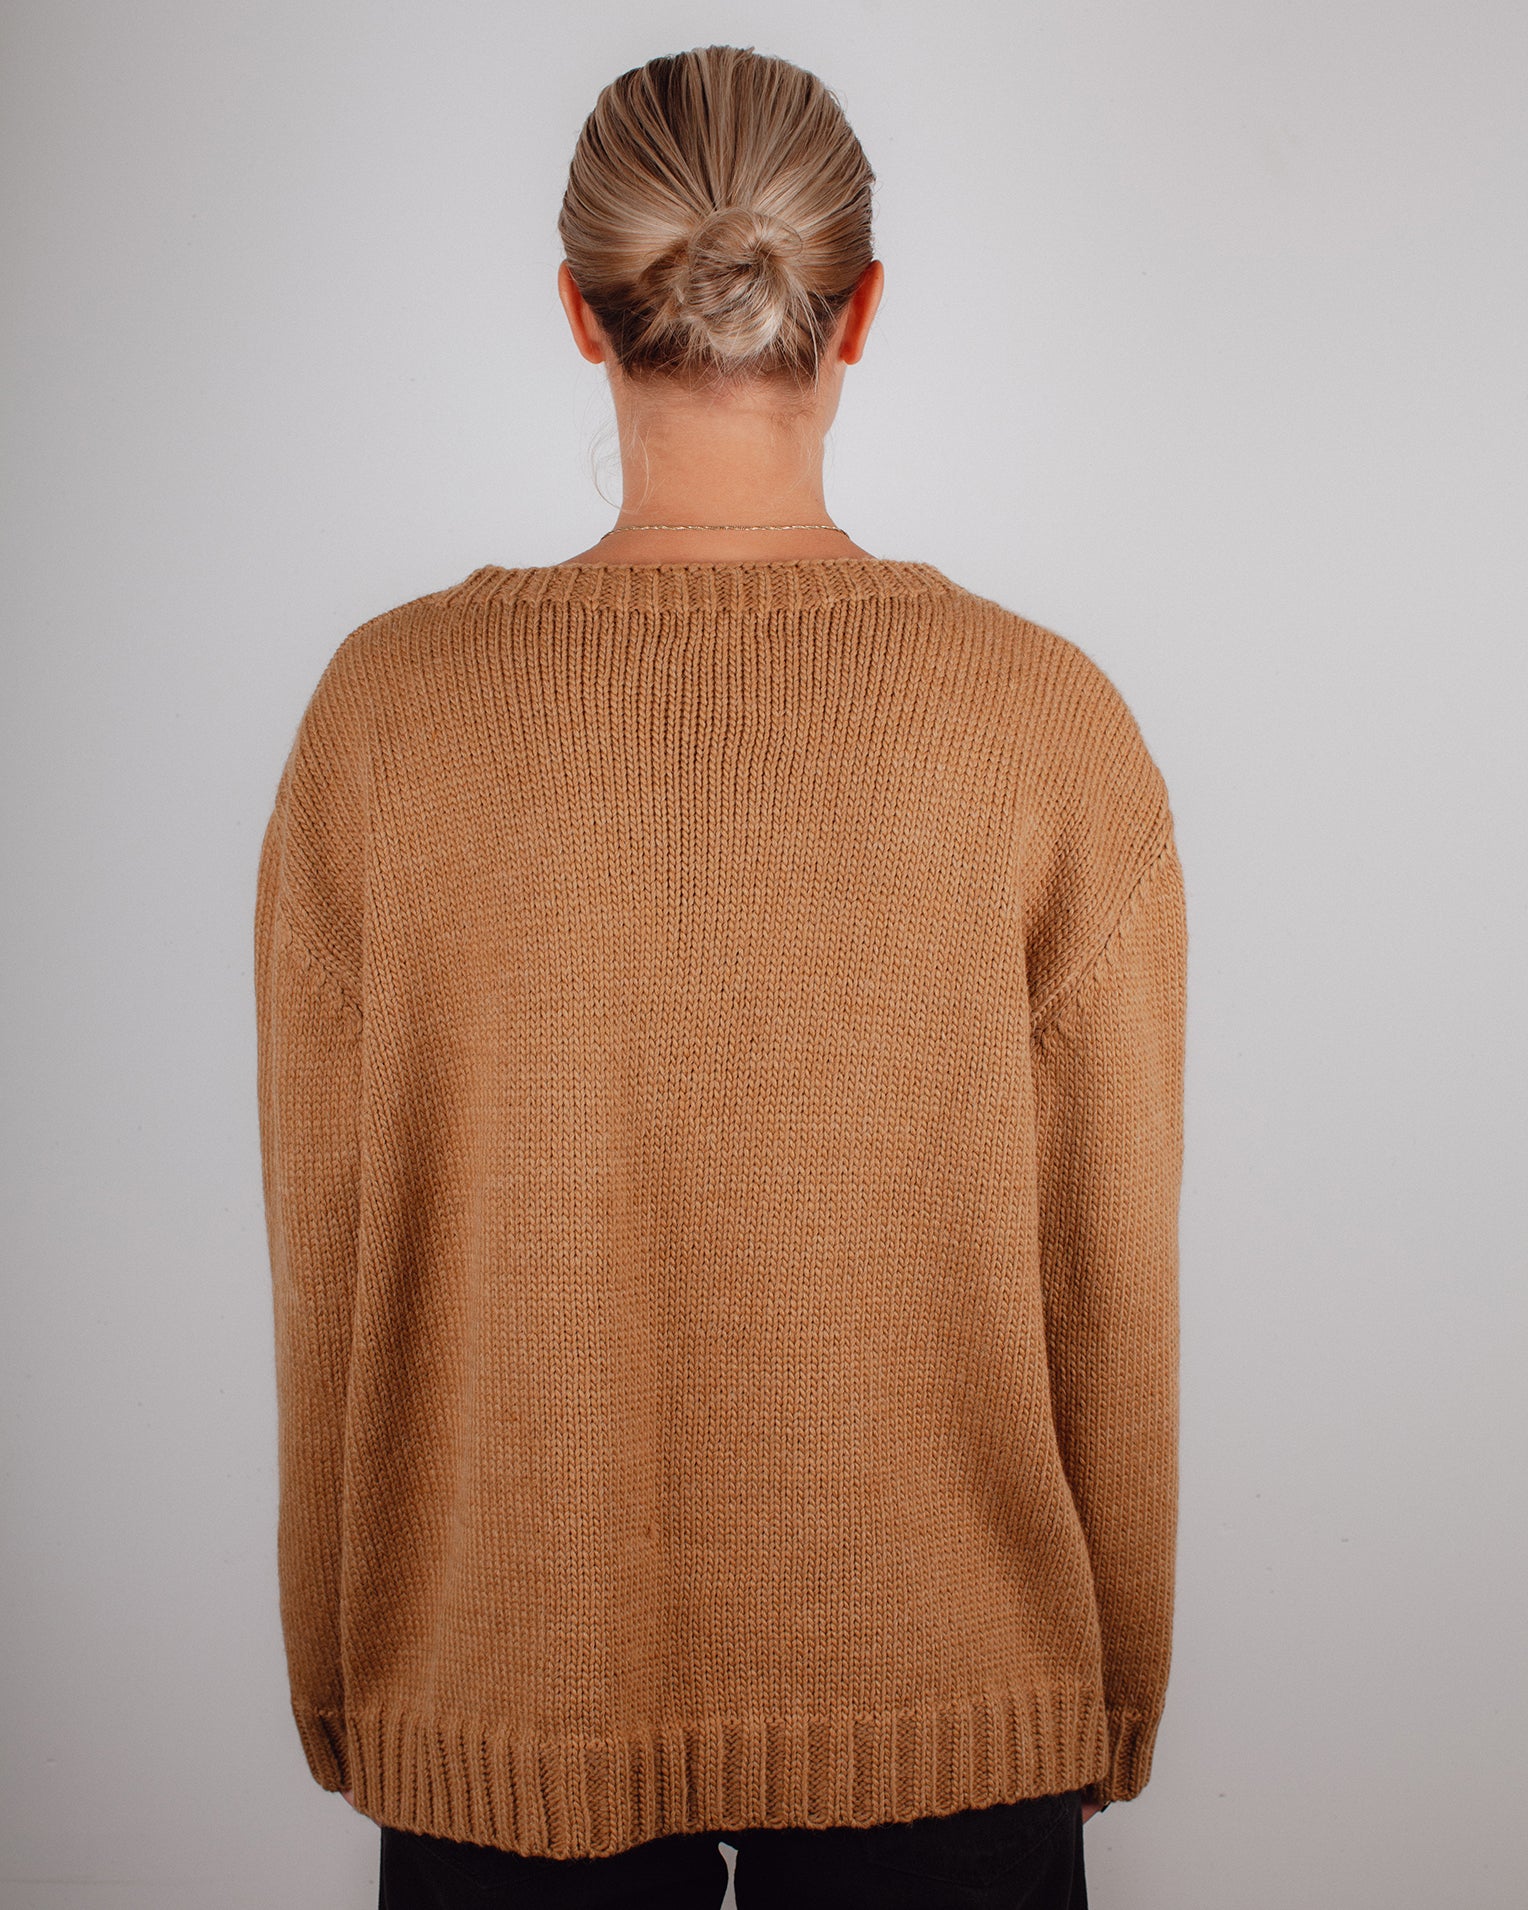 The Sweater Camel